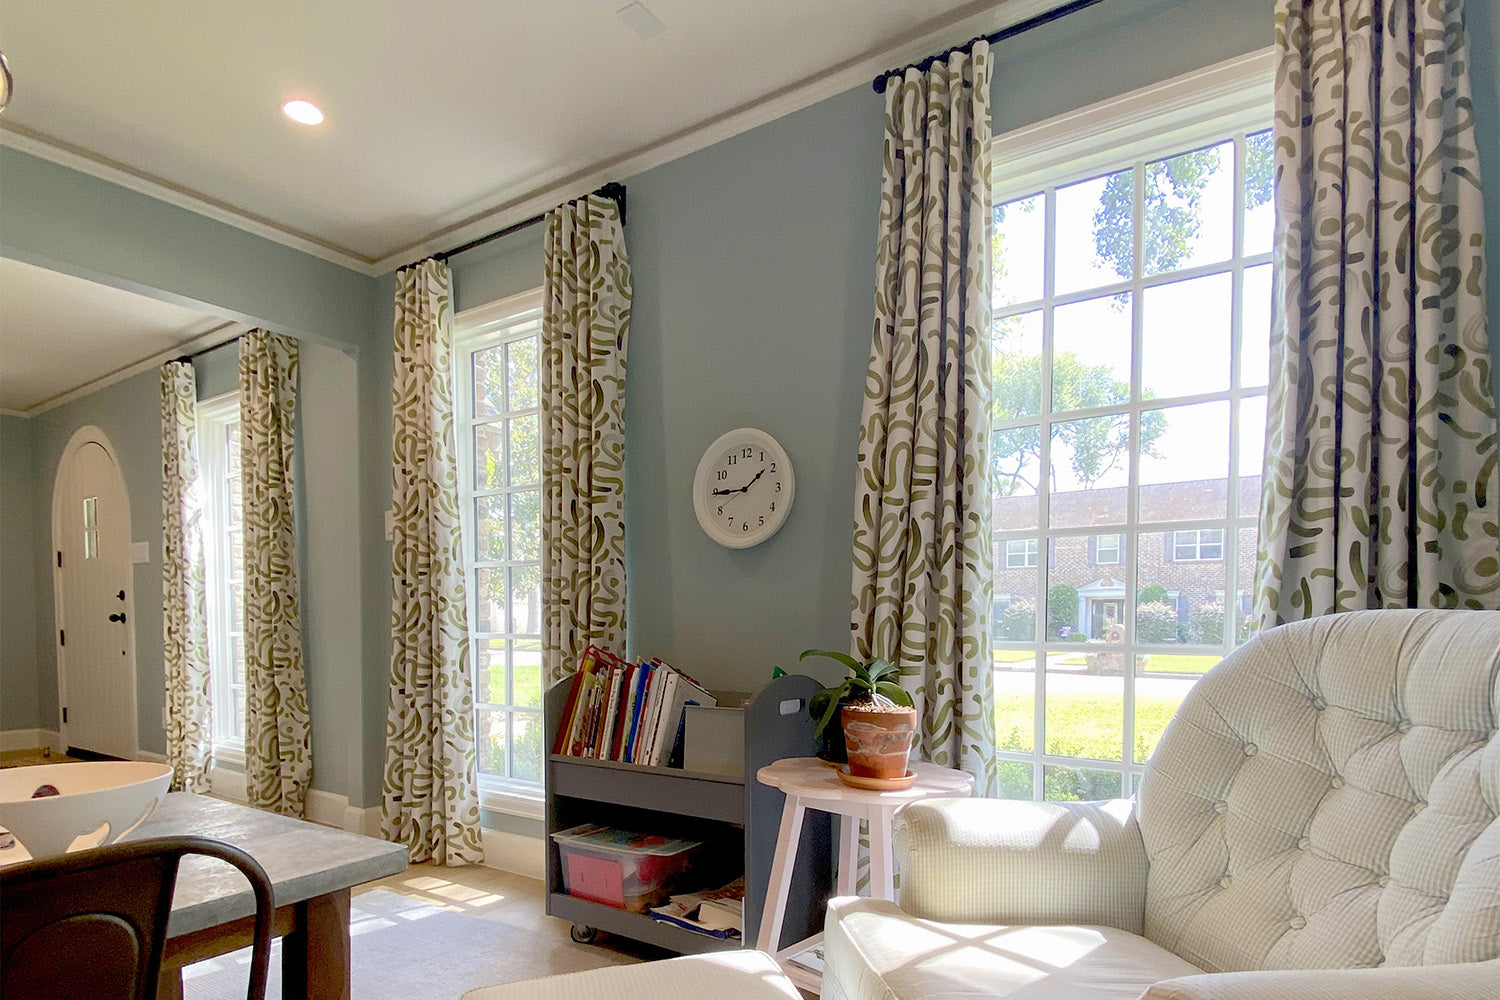 10 Ways to Decorate With Powder Blue